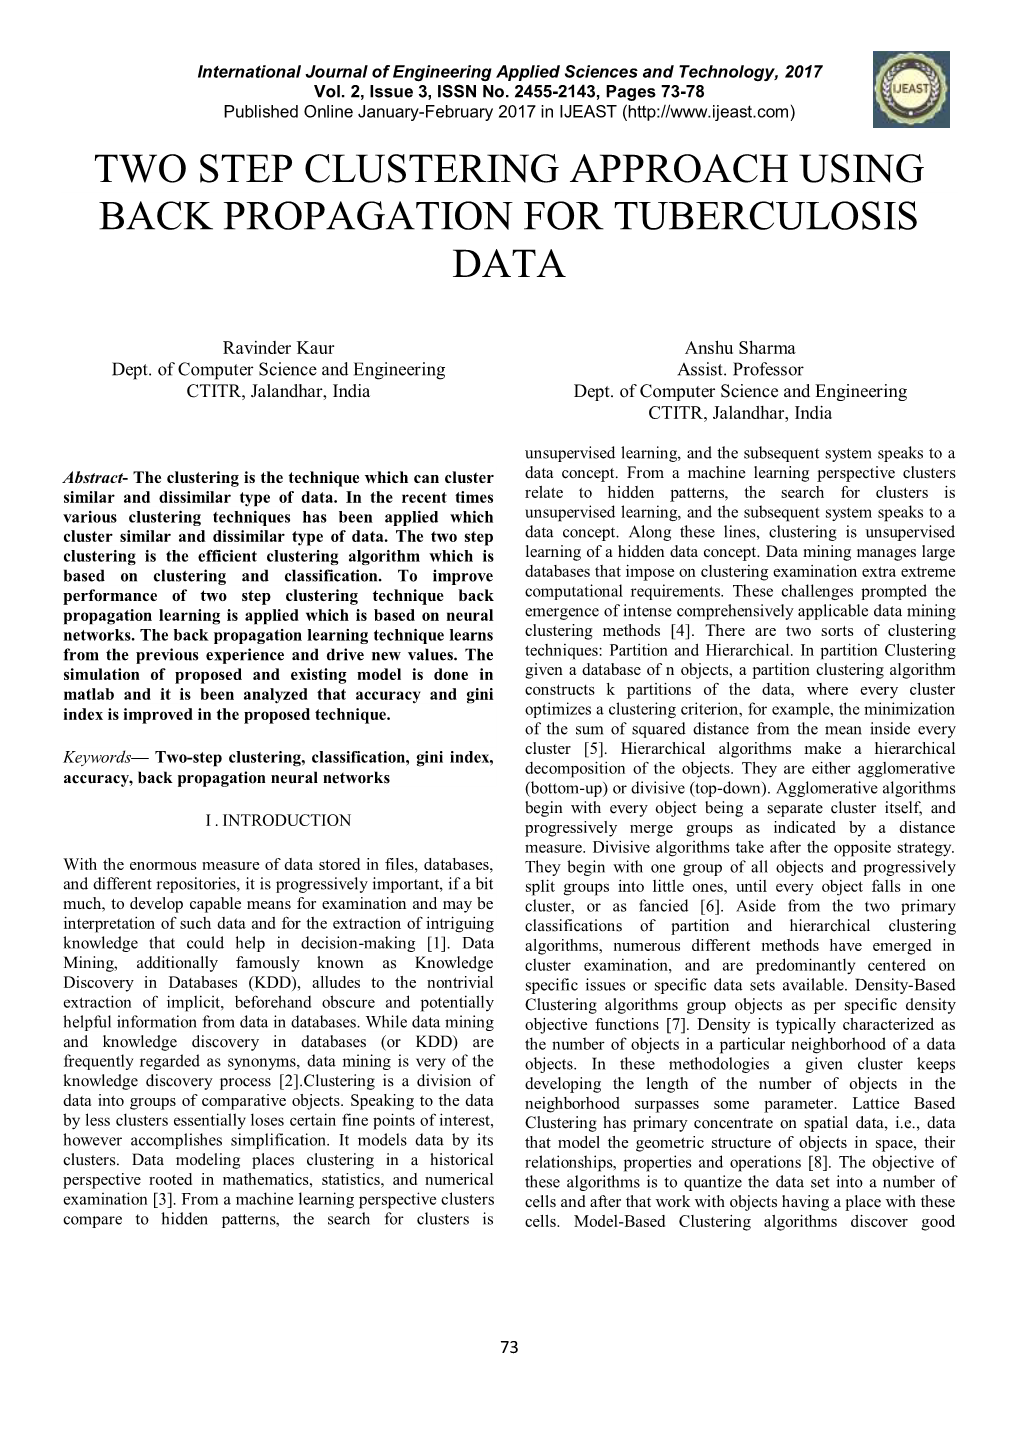 Two Step Clustering Approach Using Back Propagation for Tuberculosis Data